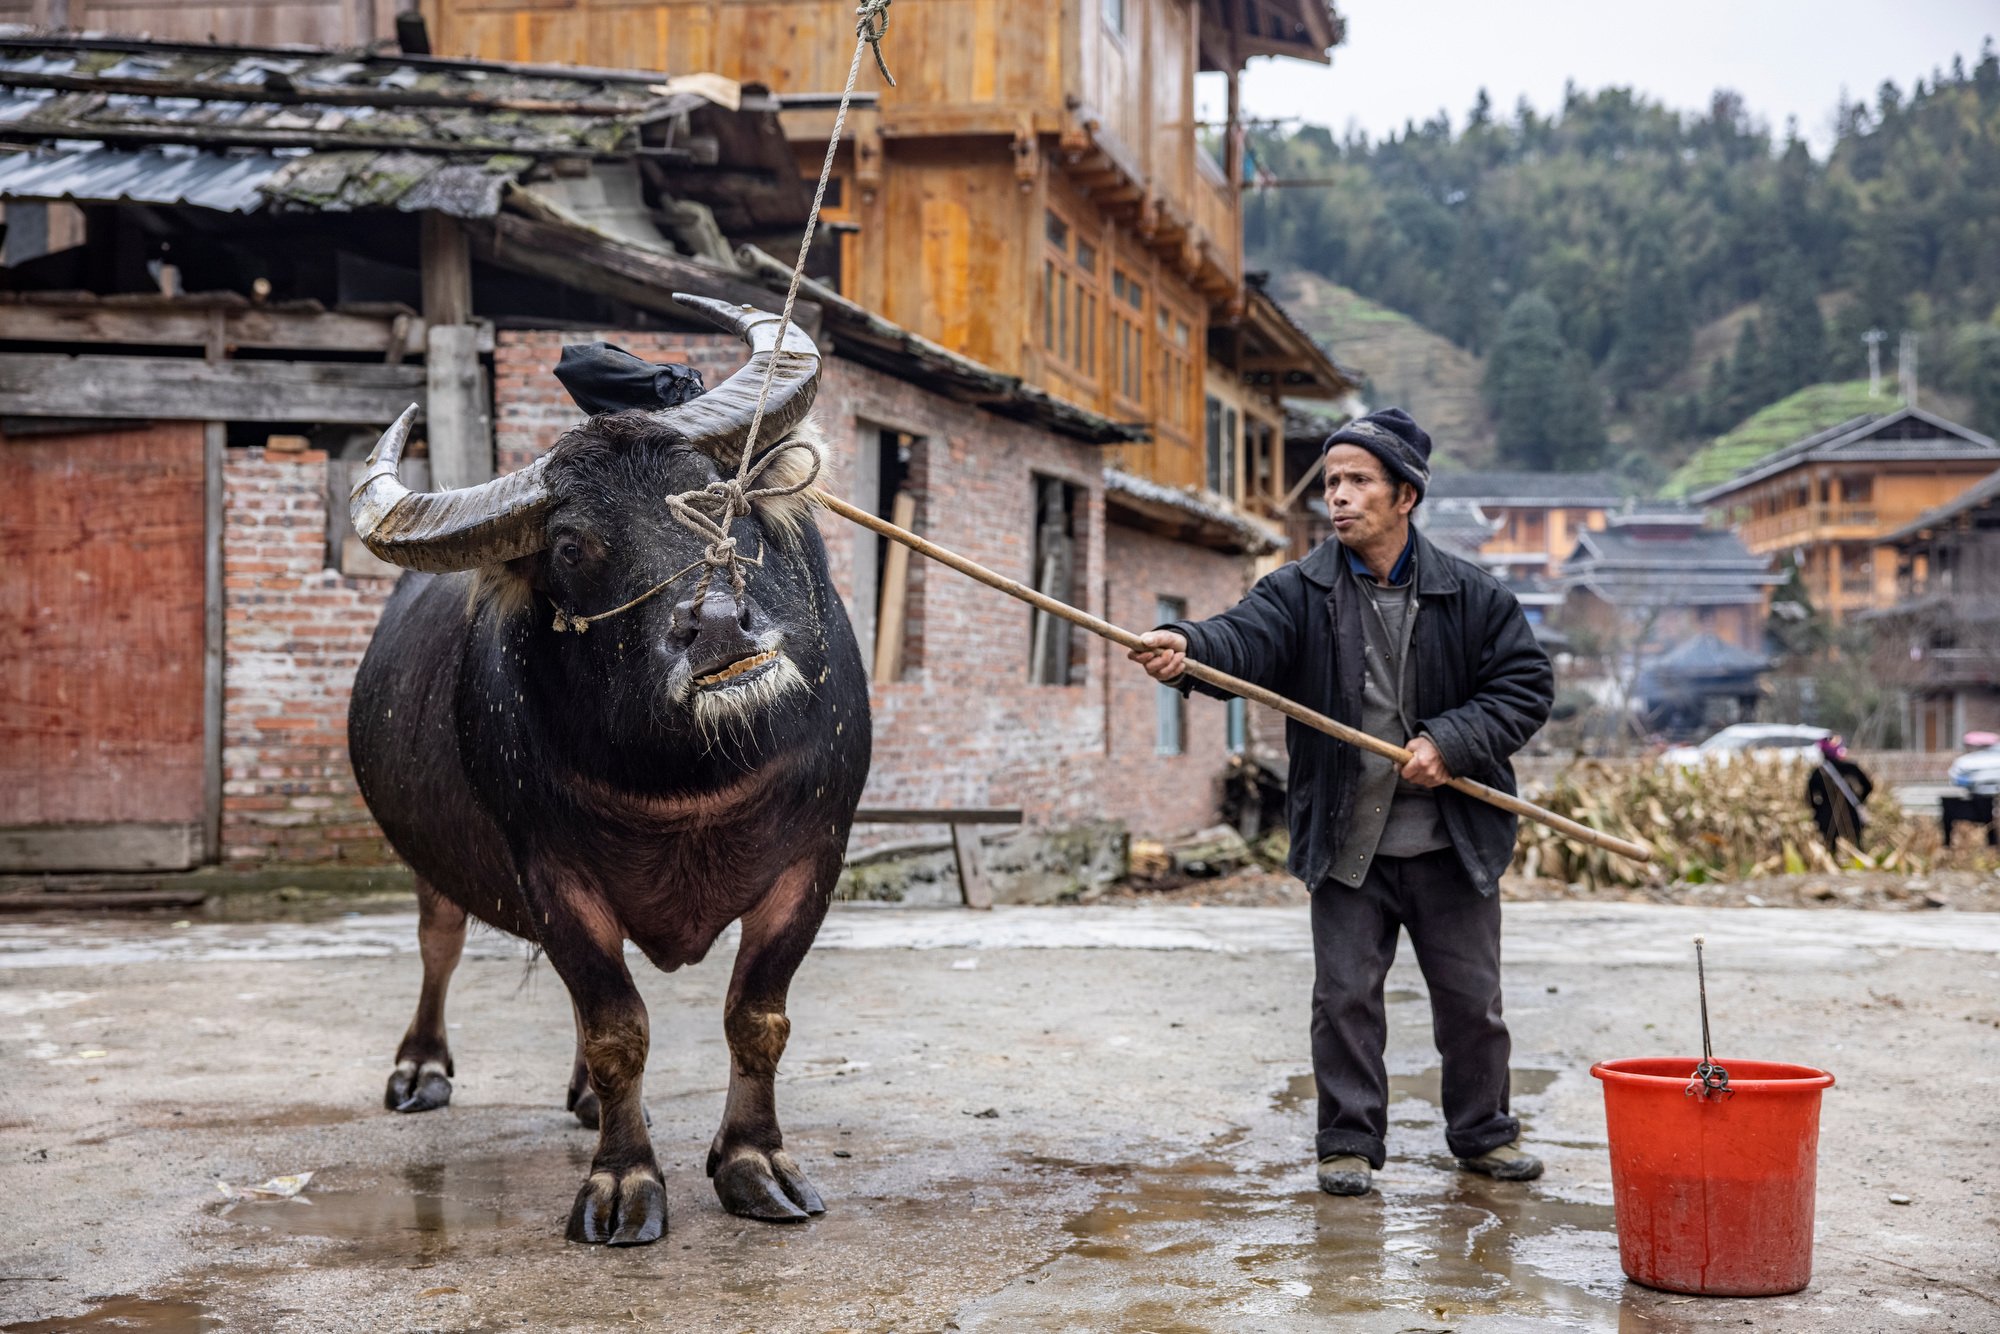  A farmer washes the village's buffalo in the Huanggang village in Guizhou, China. 